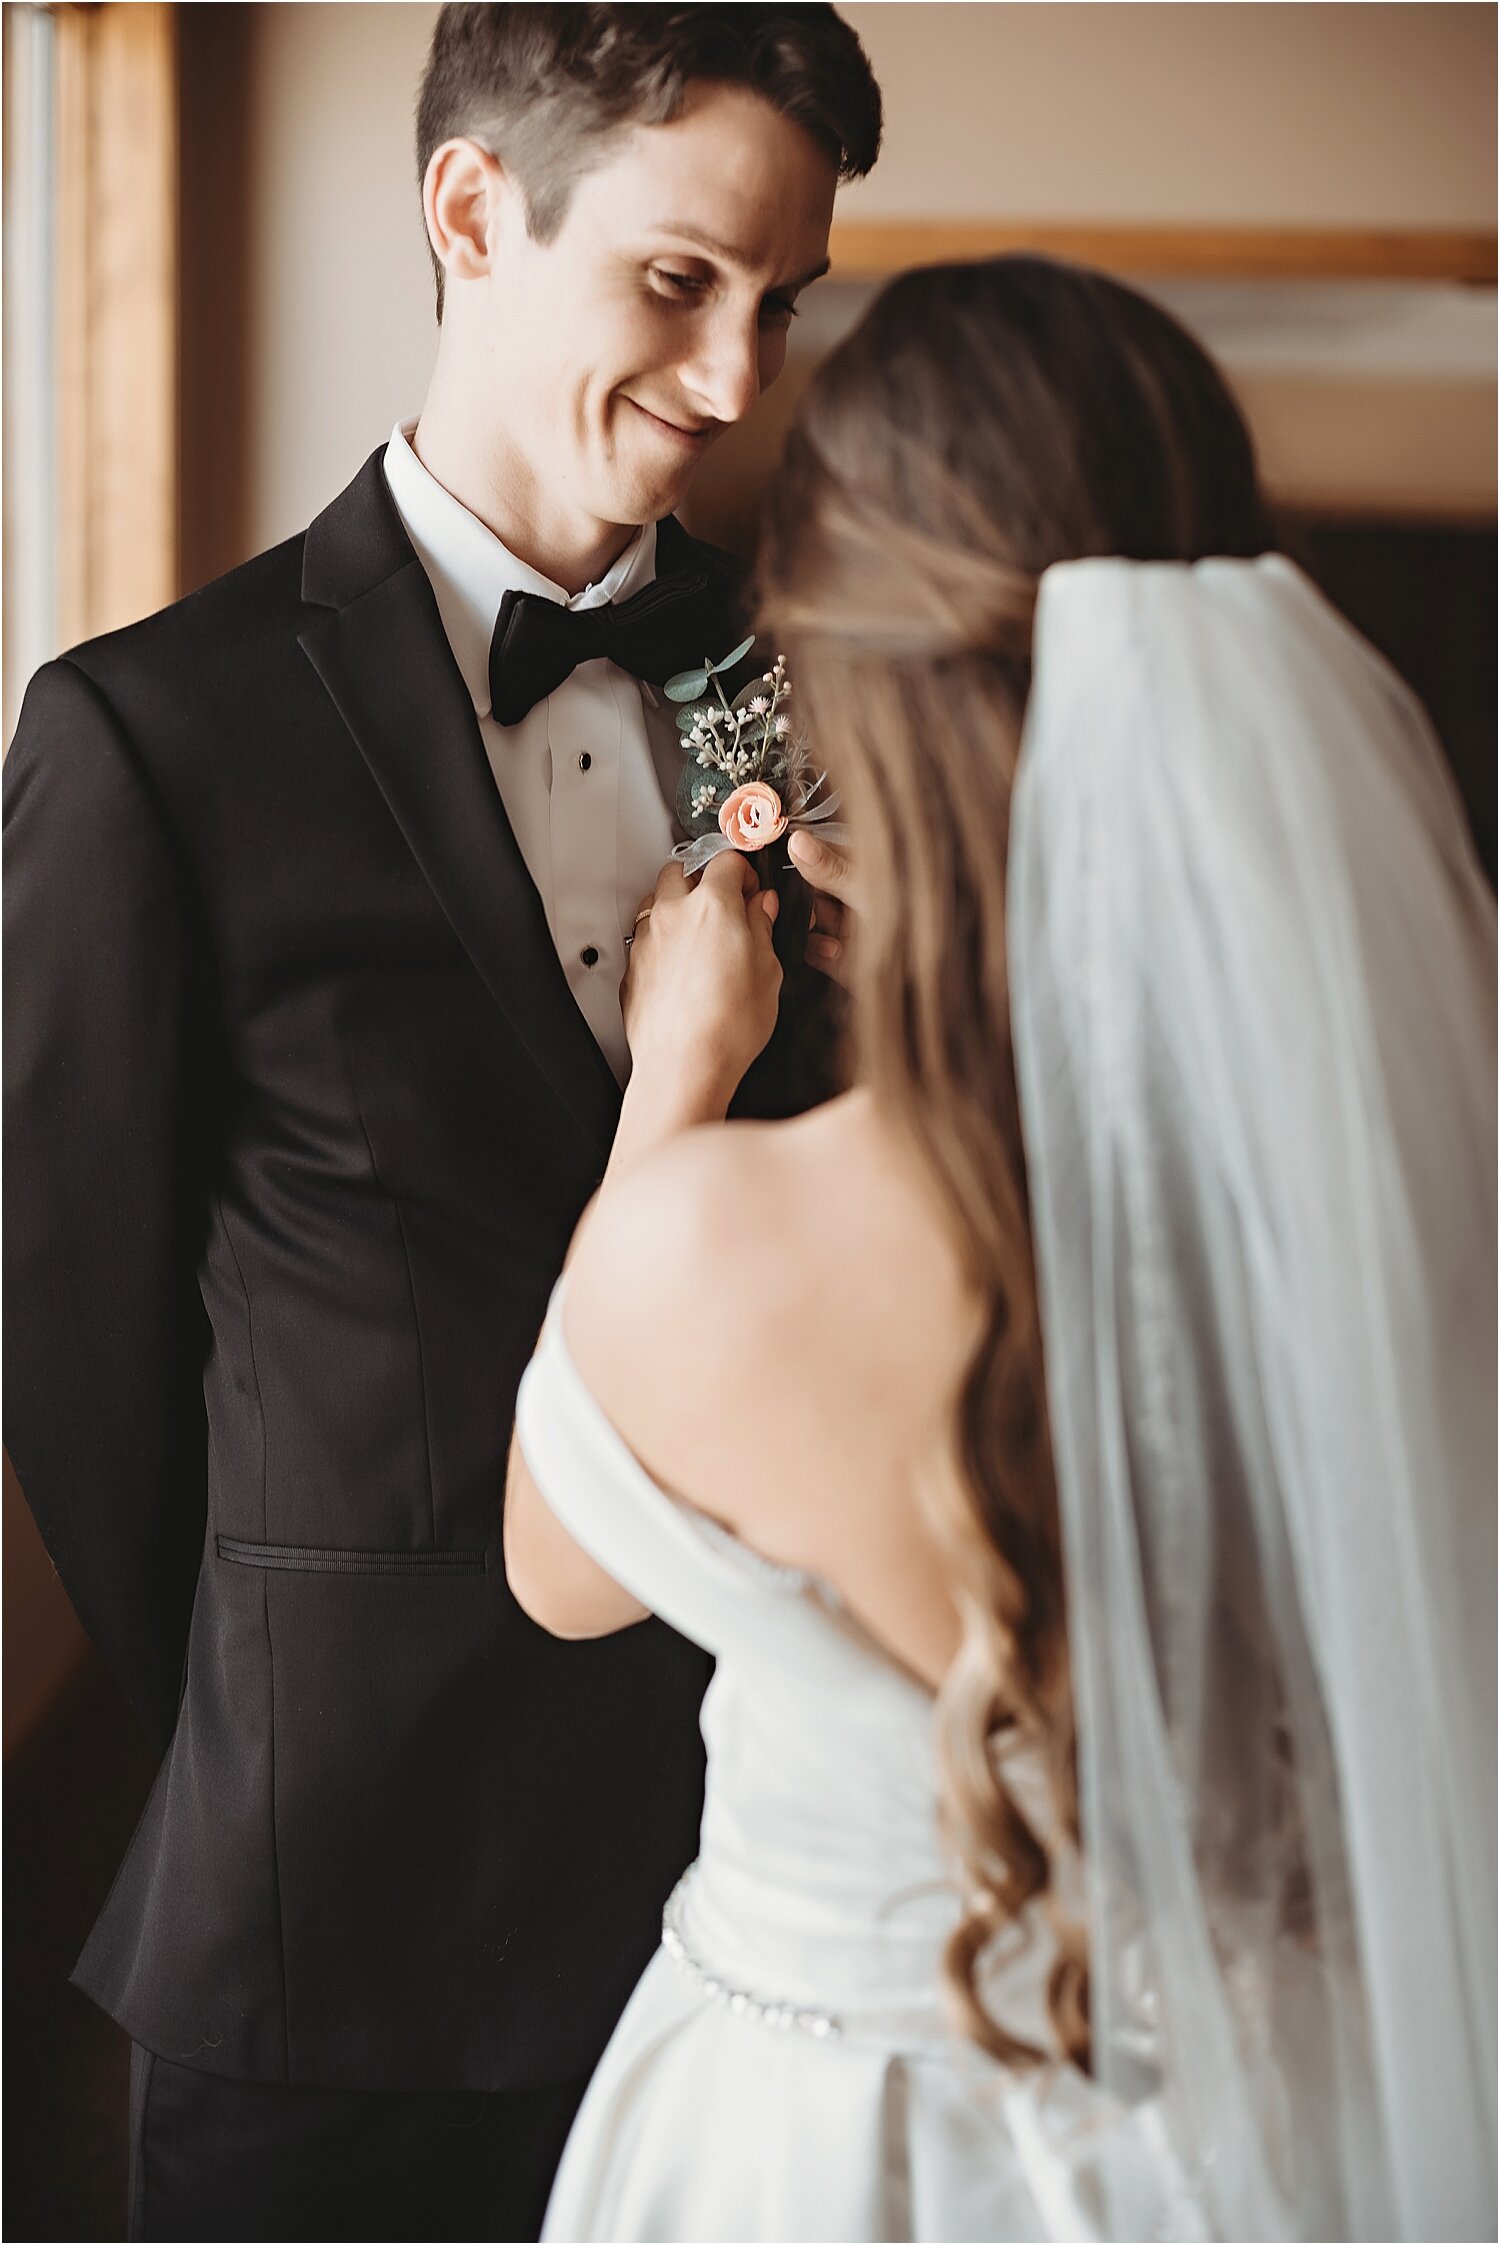 bride pins boutonniere on groom before wedding